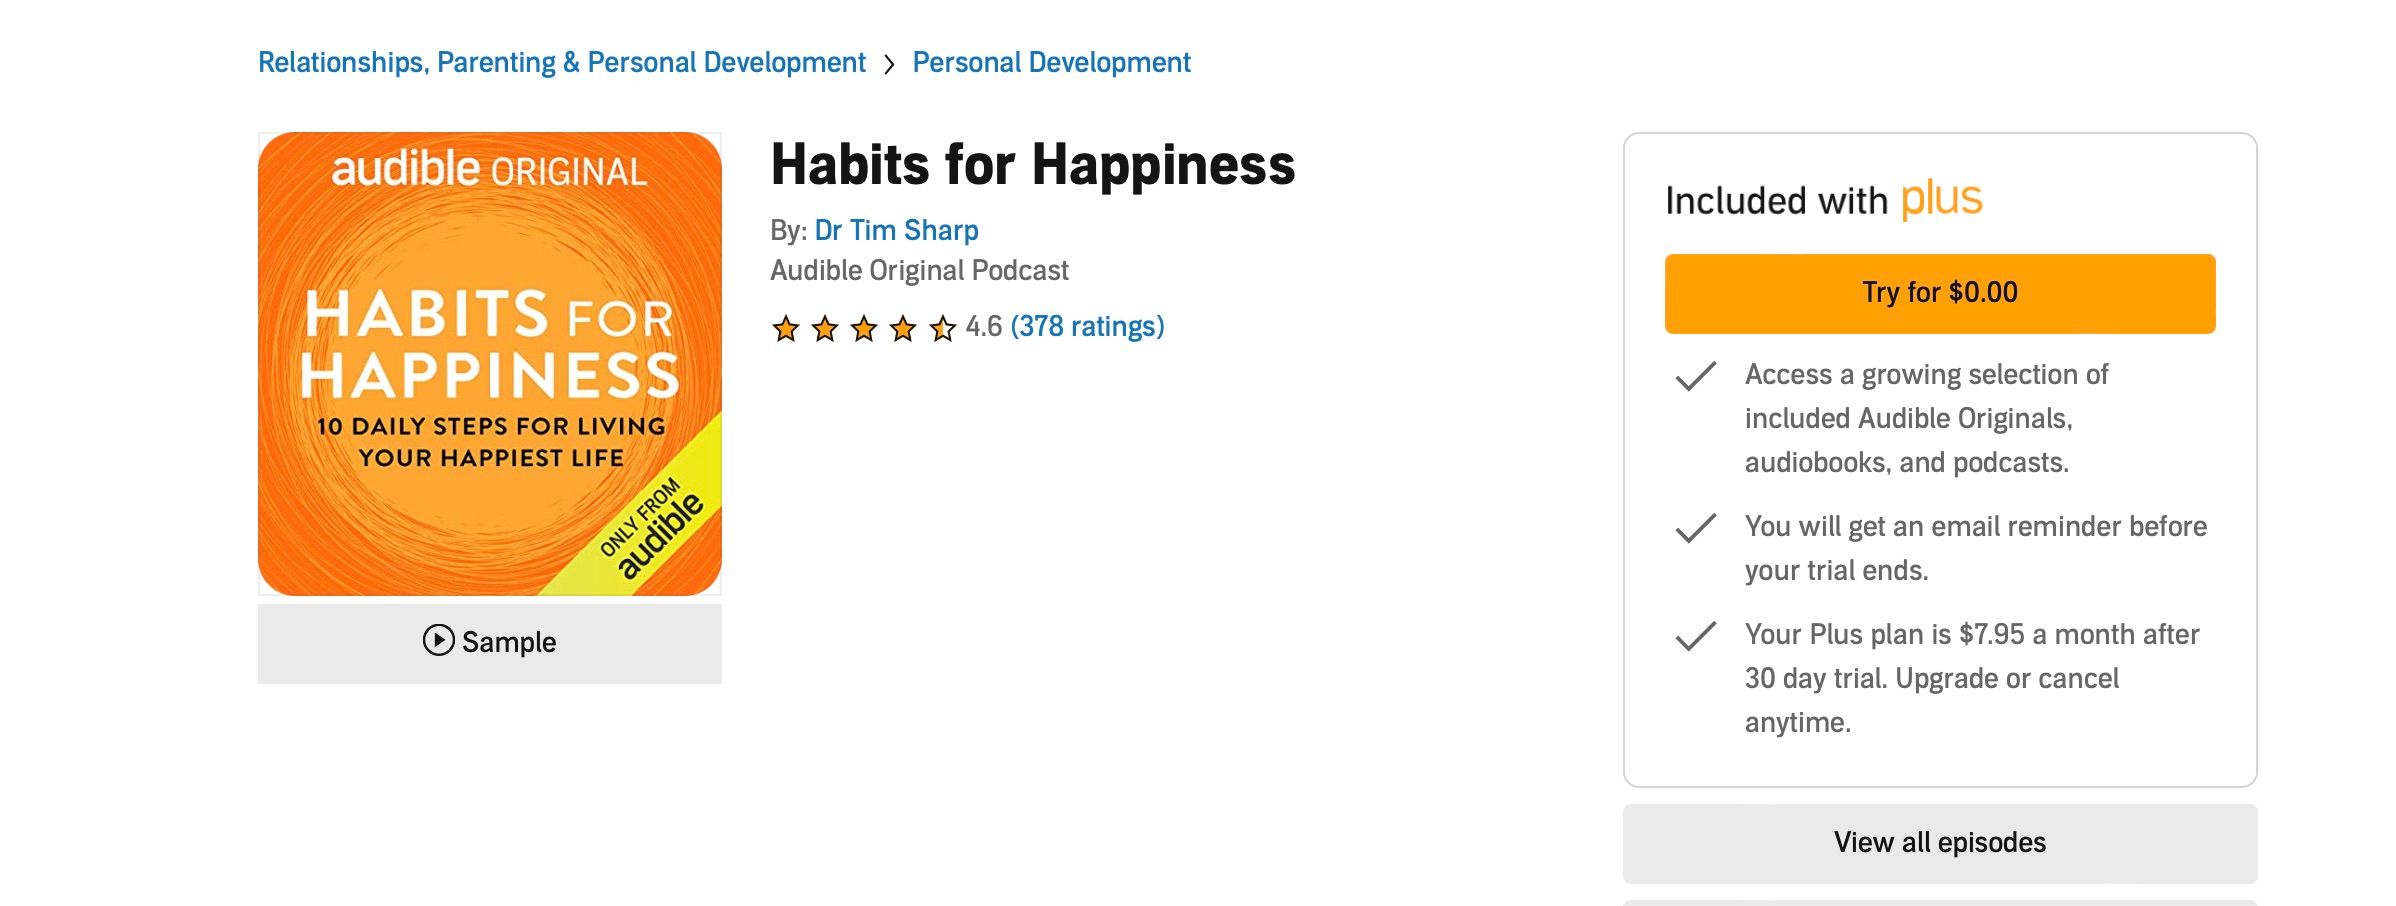 Screenshot showing Habits for Happiness audio series from Audible